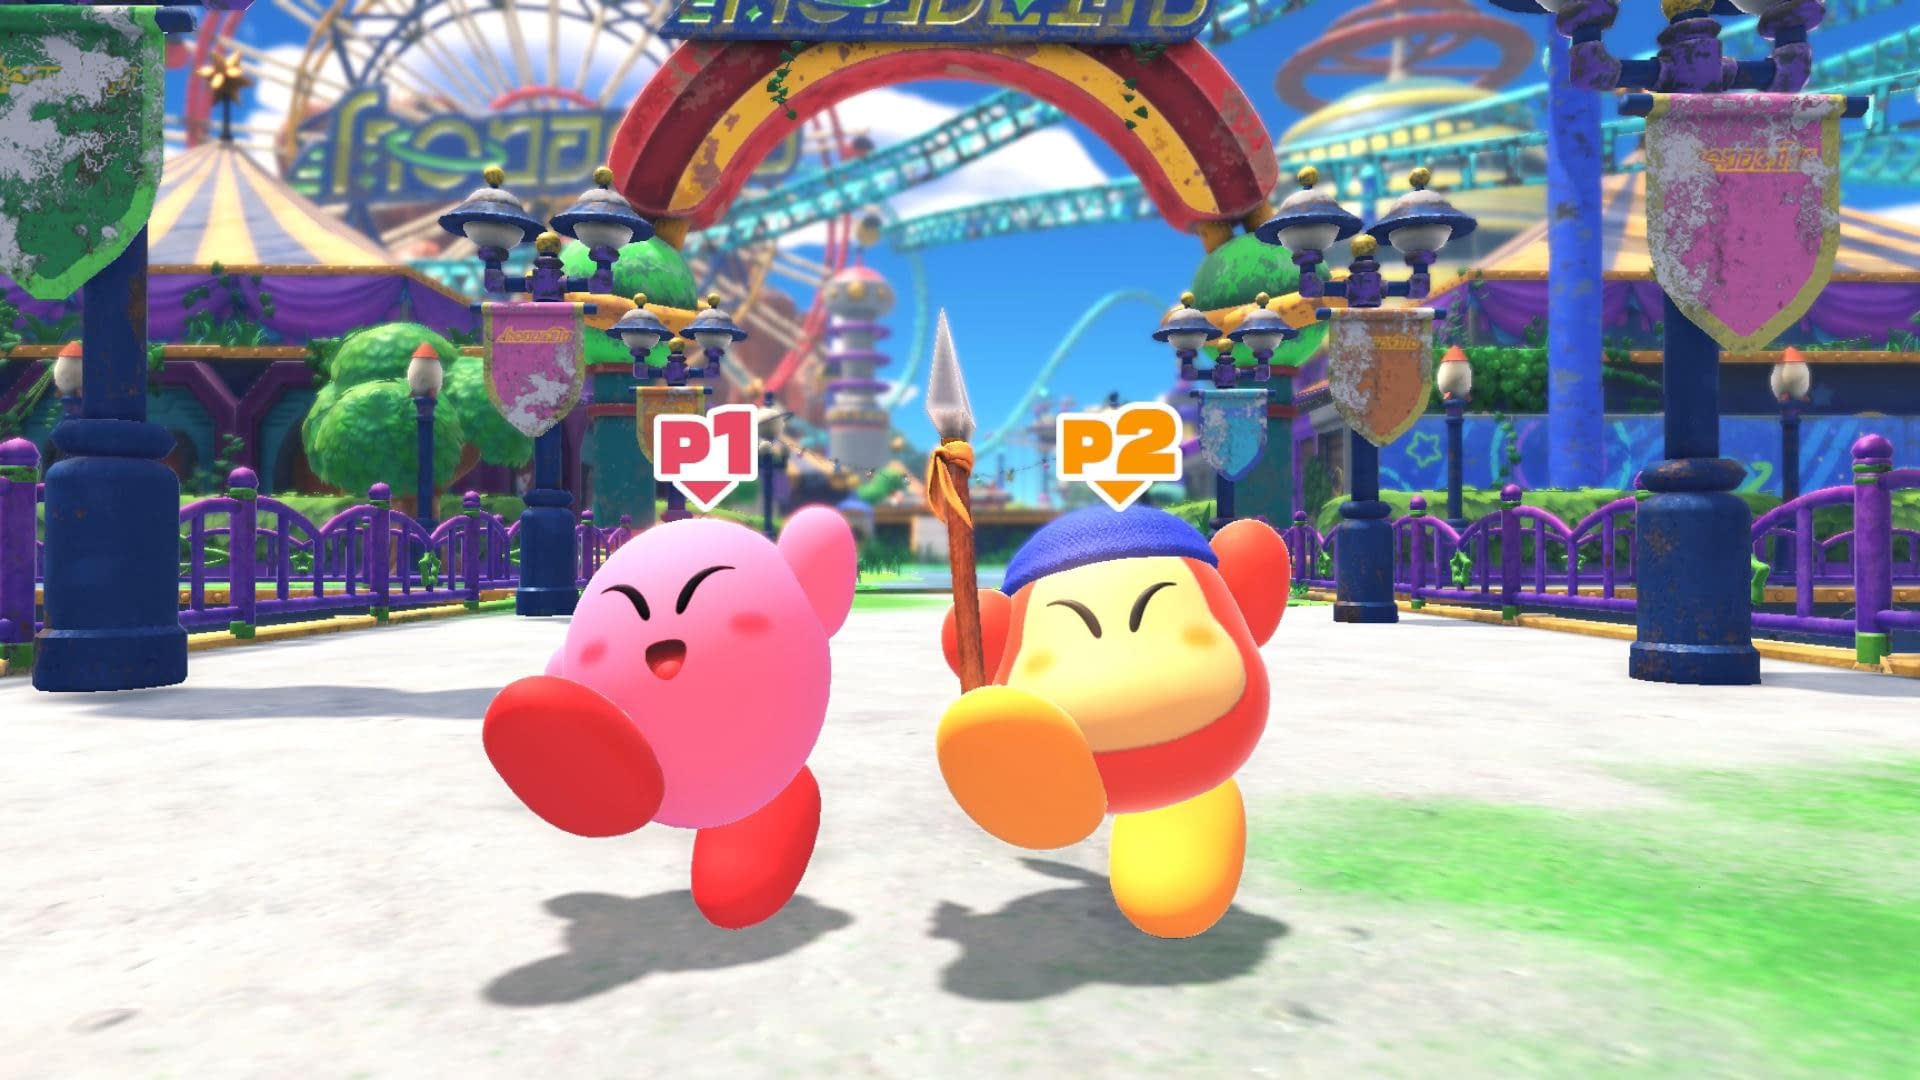 The new Kirby game will release next week, Nintendo confirms